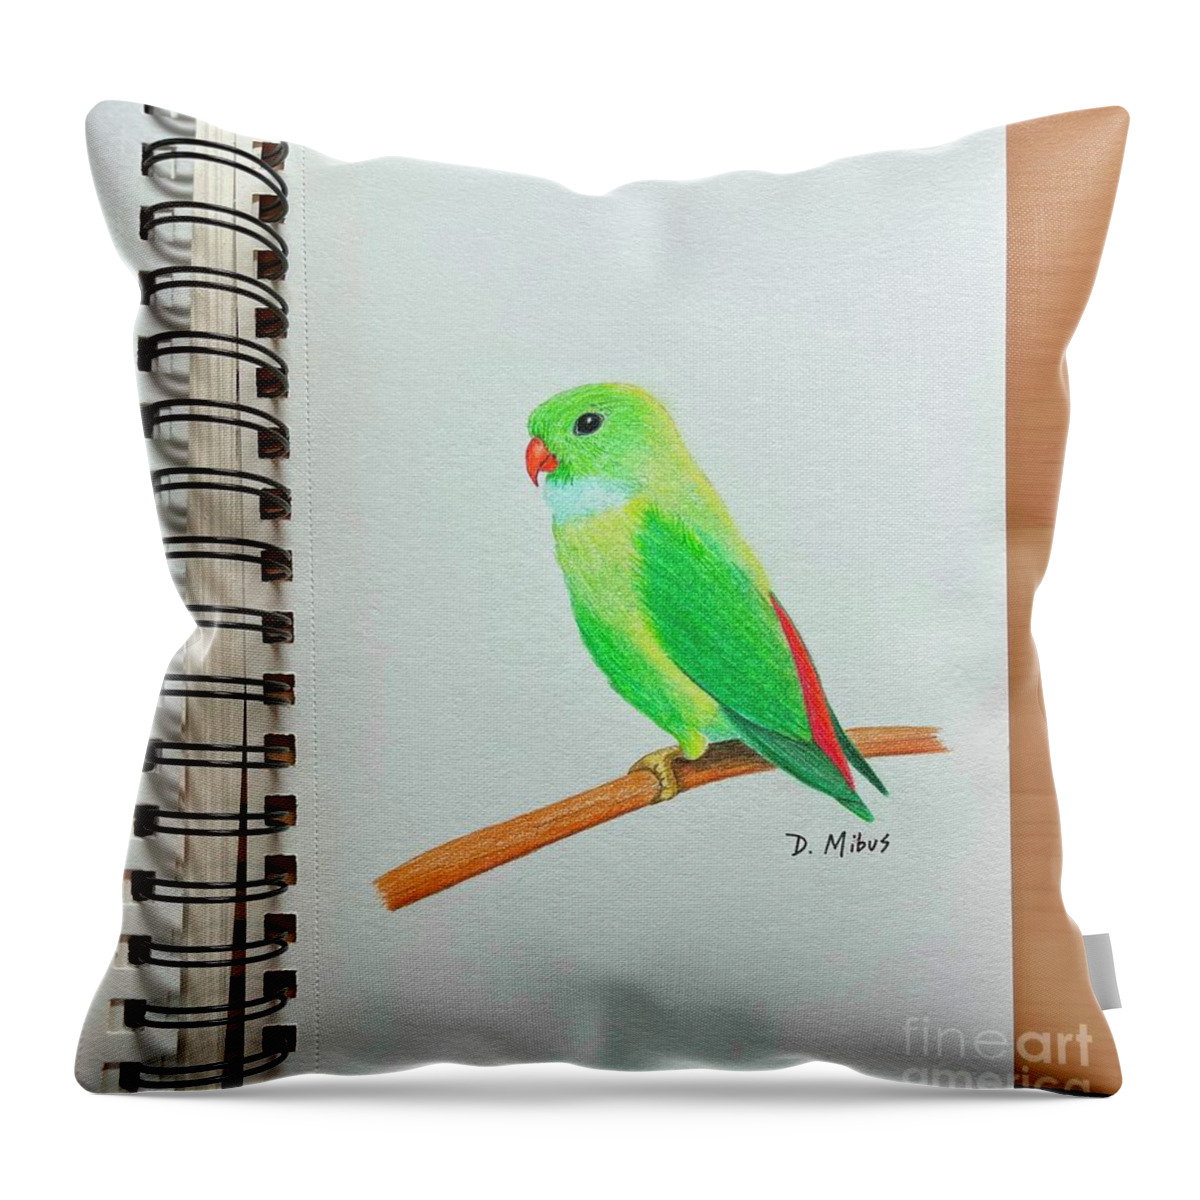  Throw Pillow featuring the digital art Day 109 by Donna Mibus